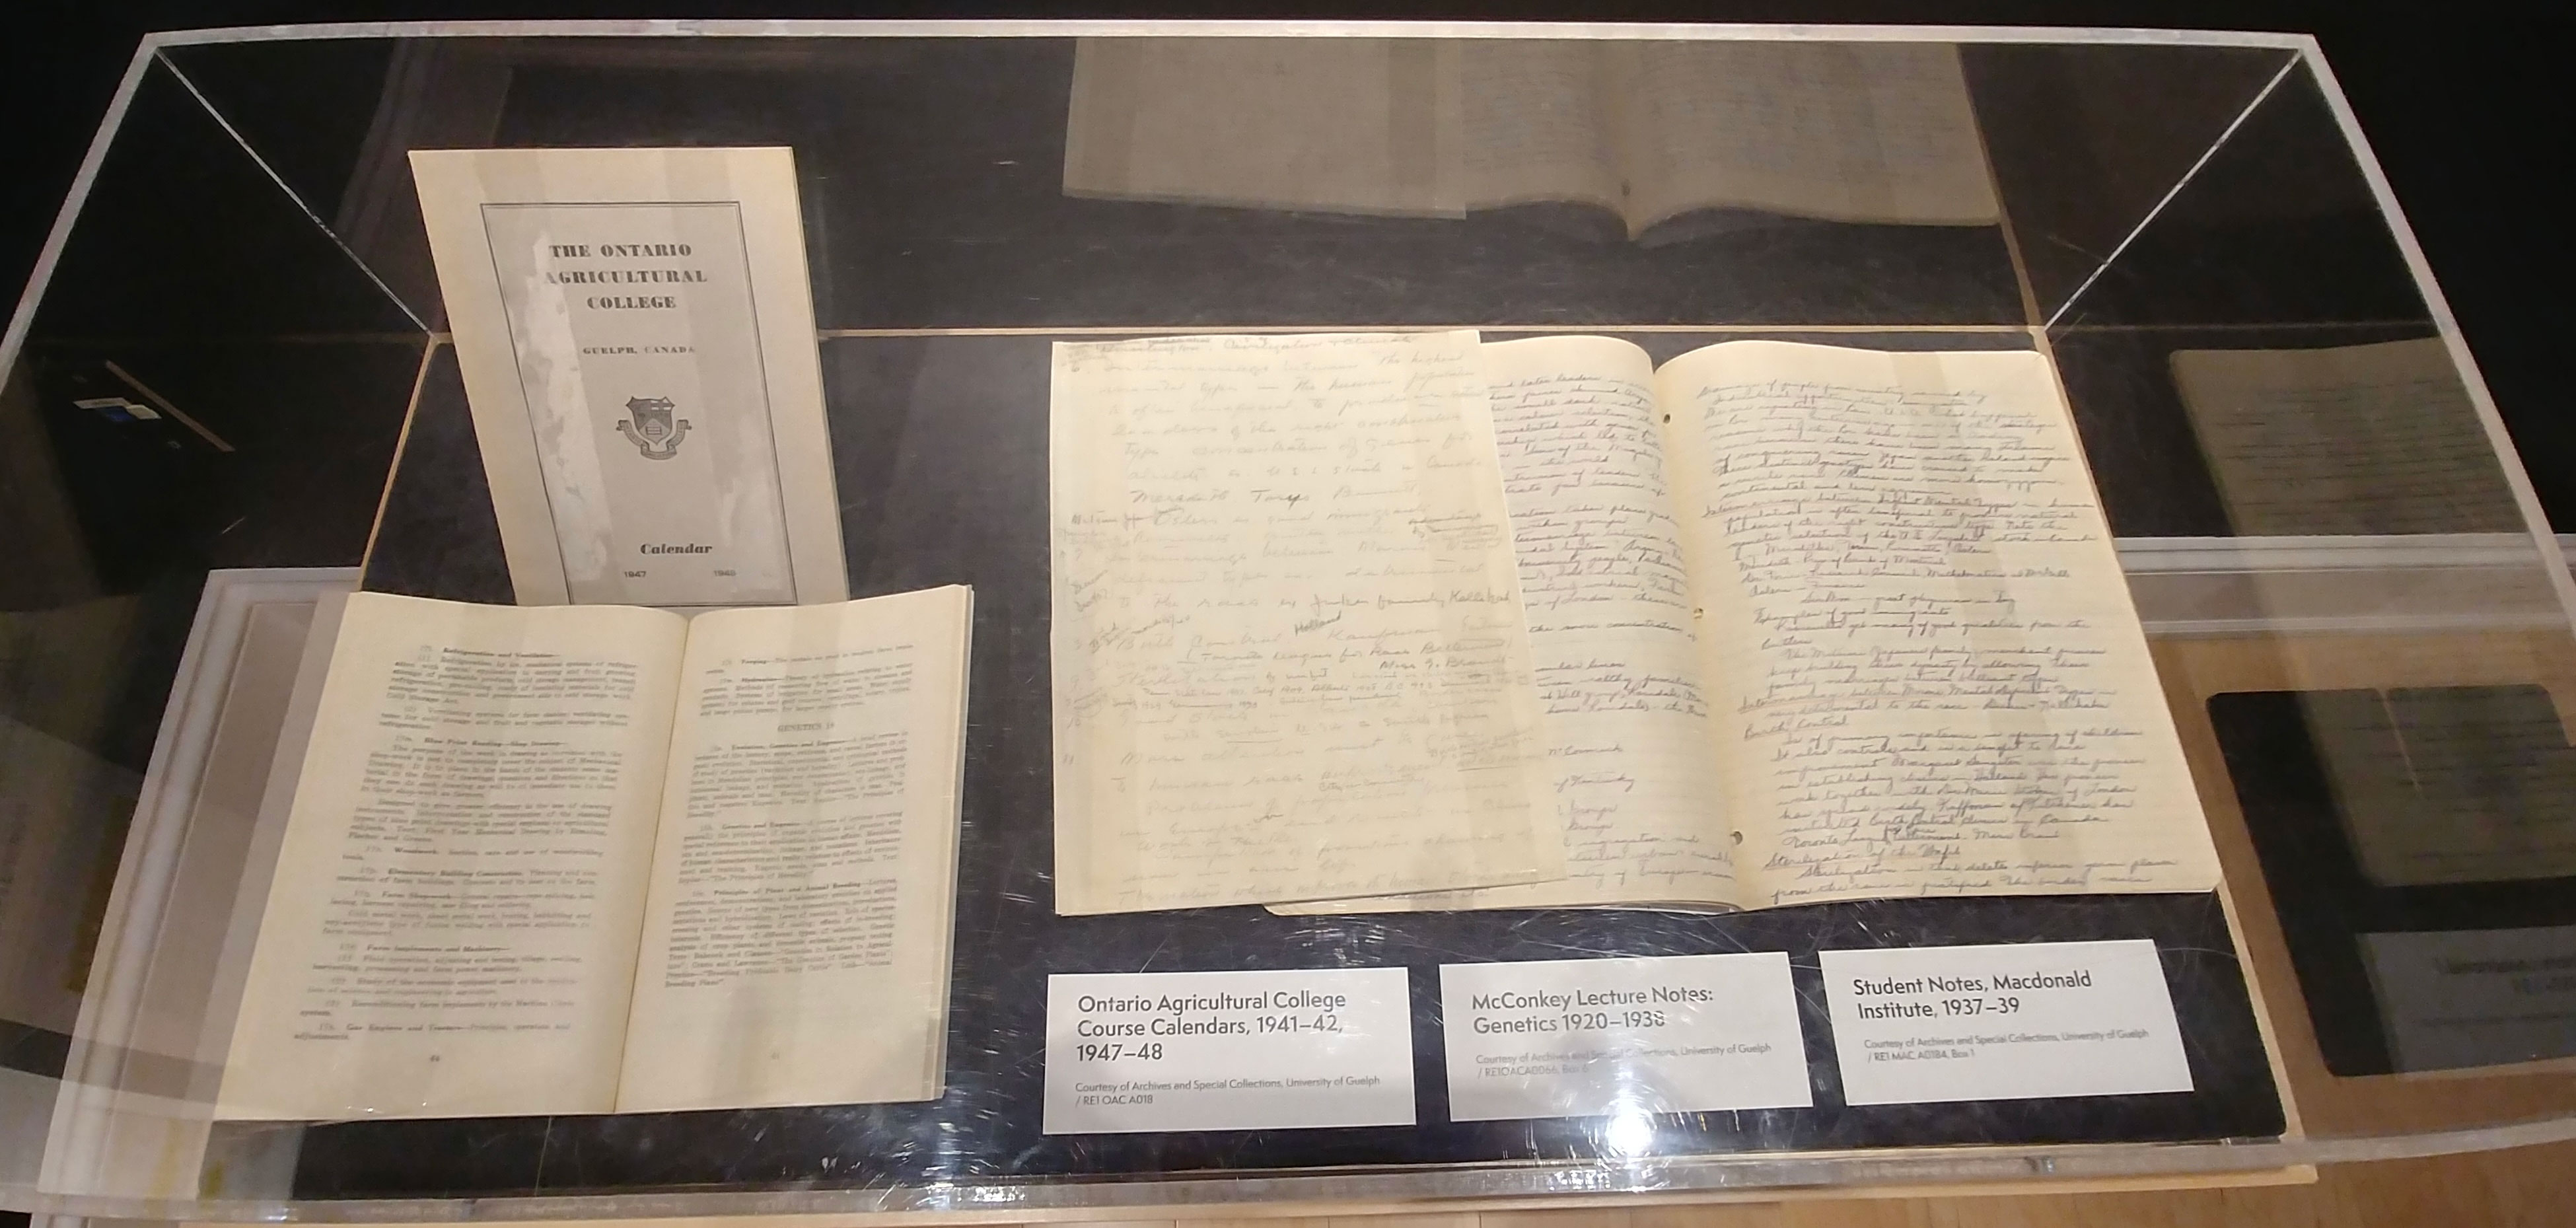 A book and notes in a glass case